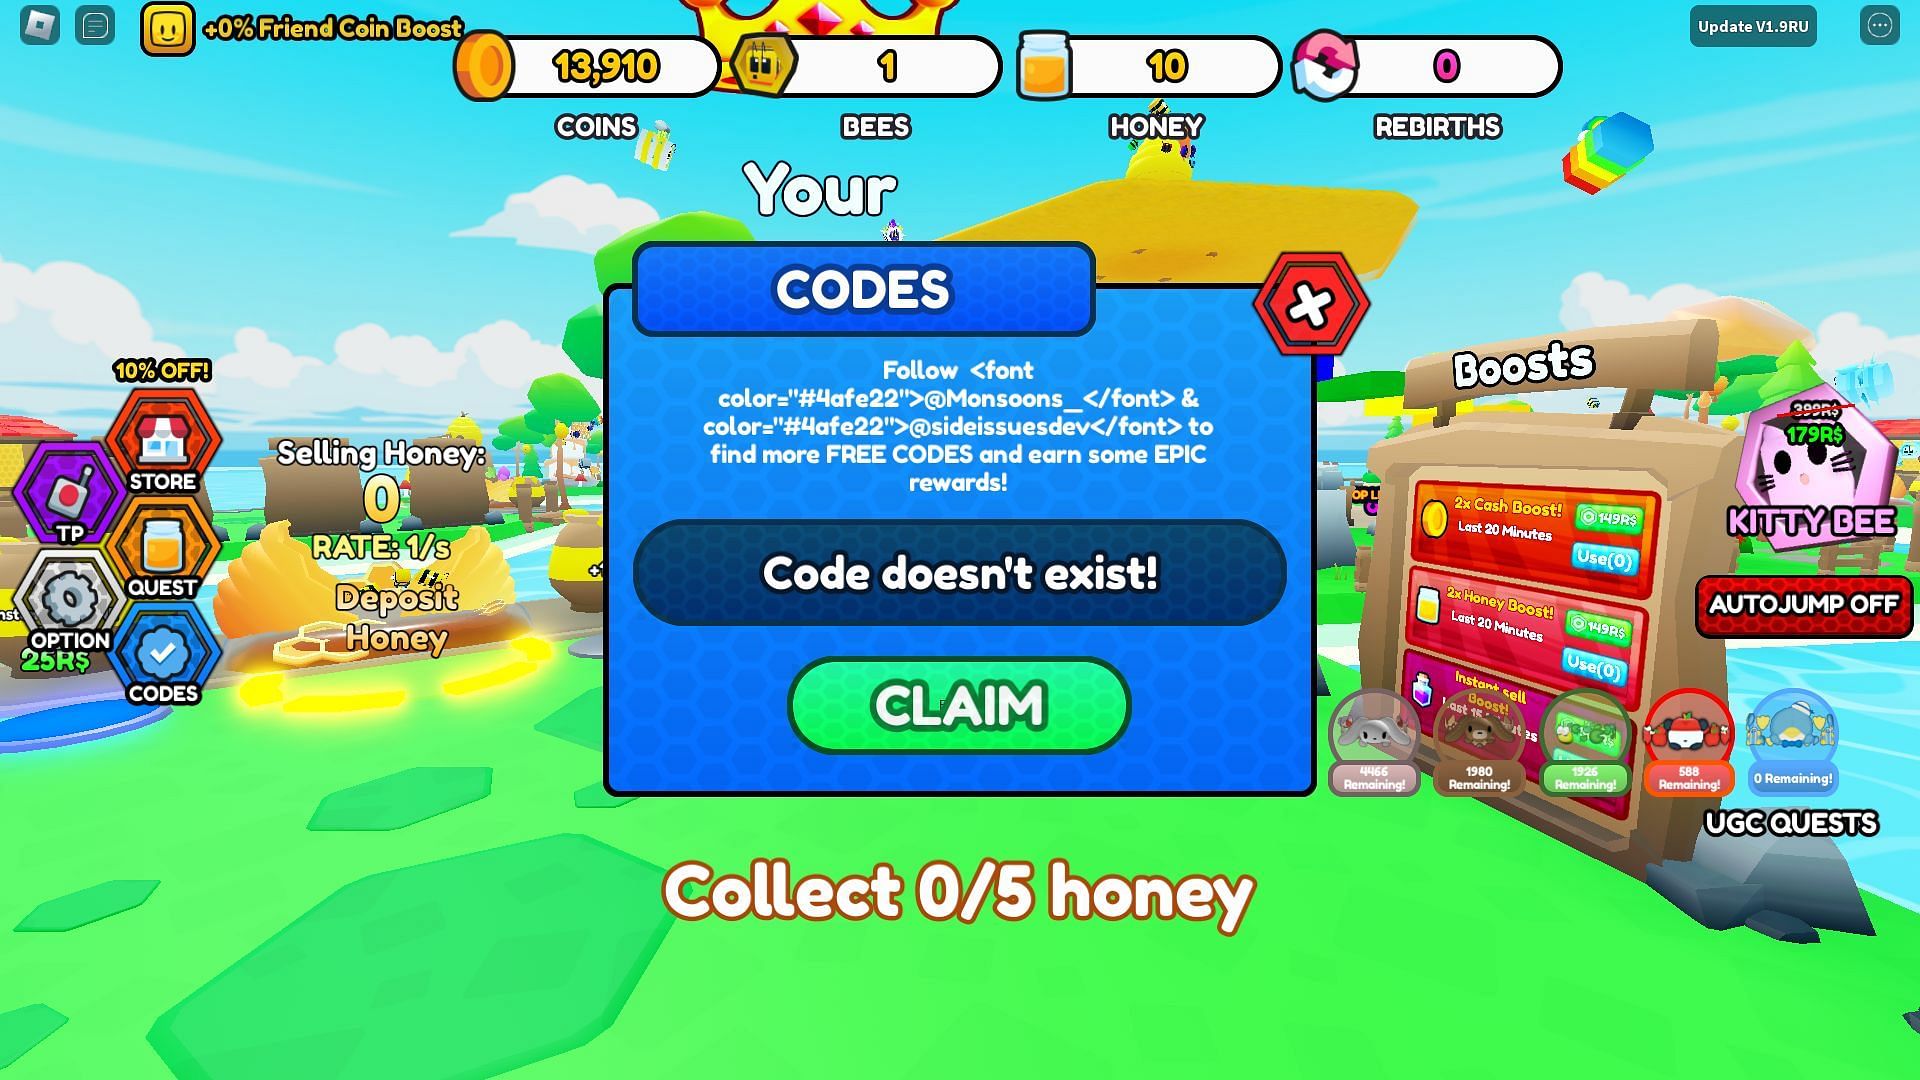 Troubleshooting codes for Bee Factory (Image via Roblox)